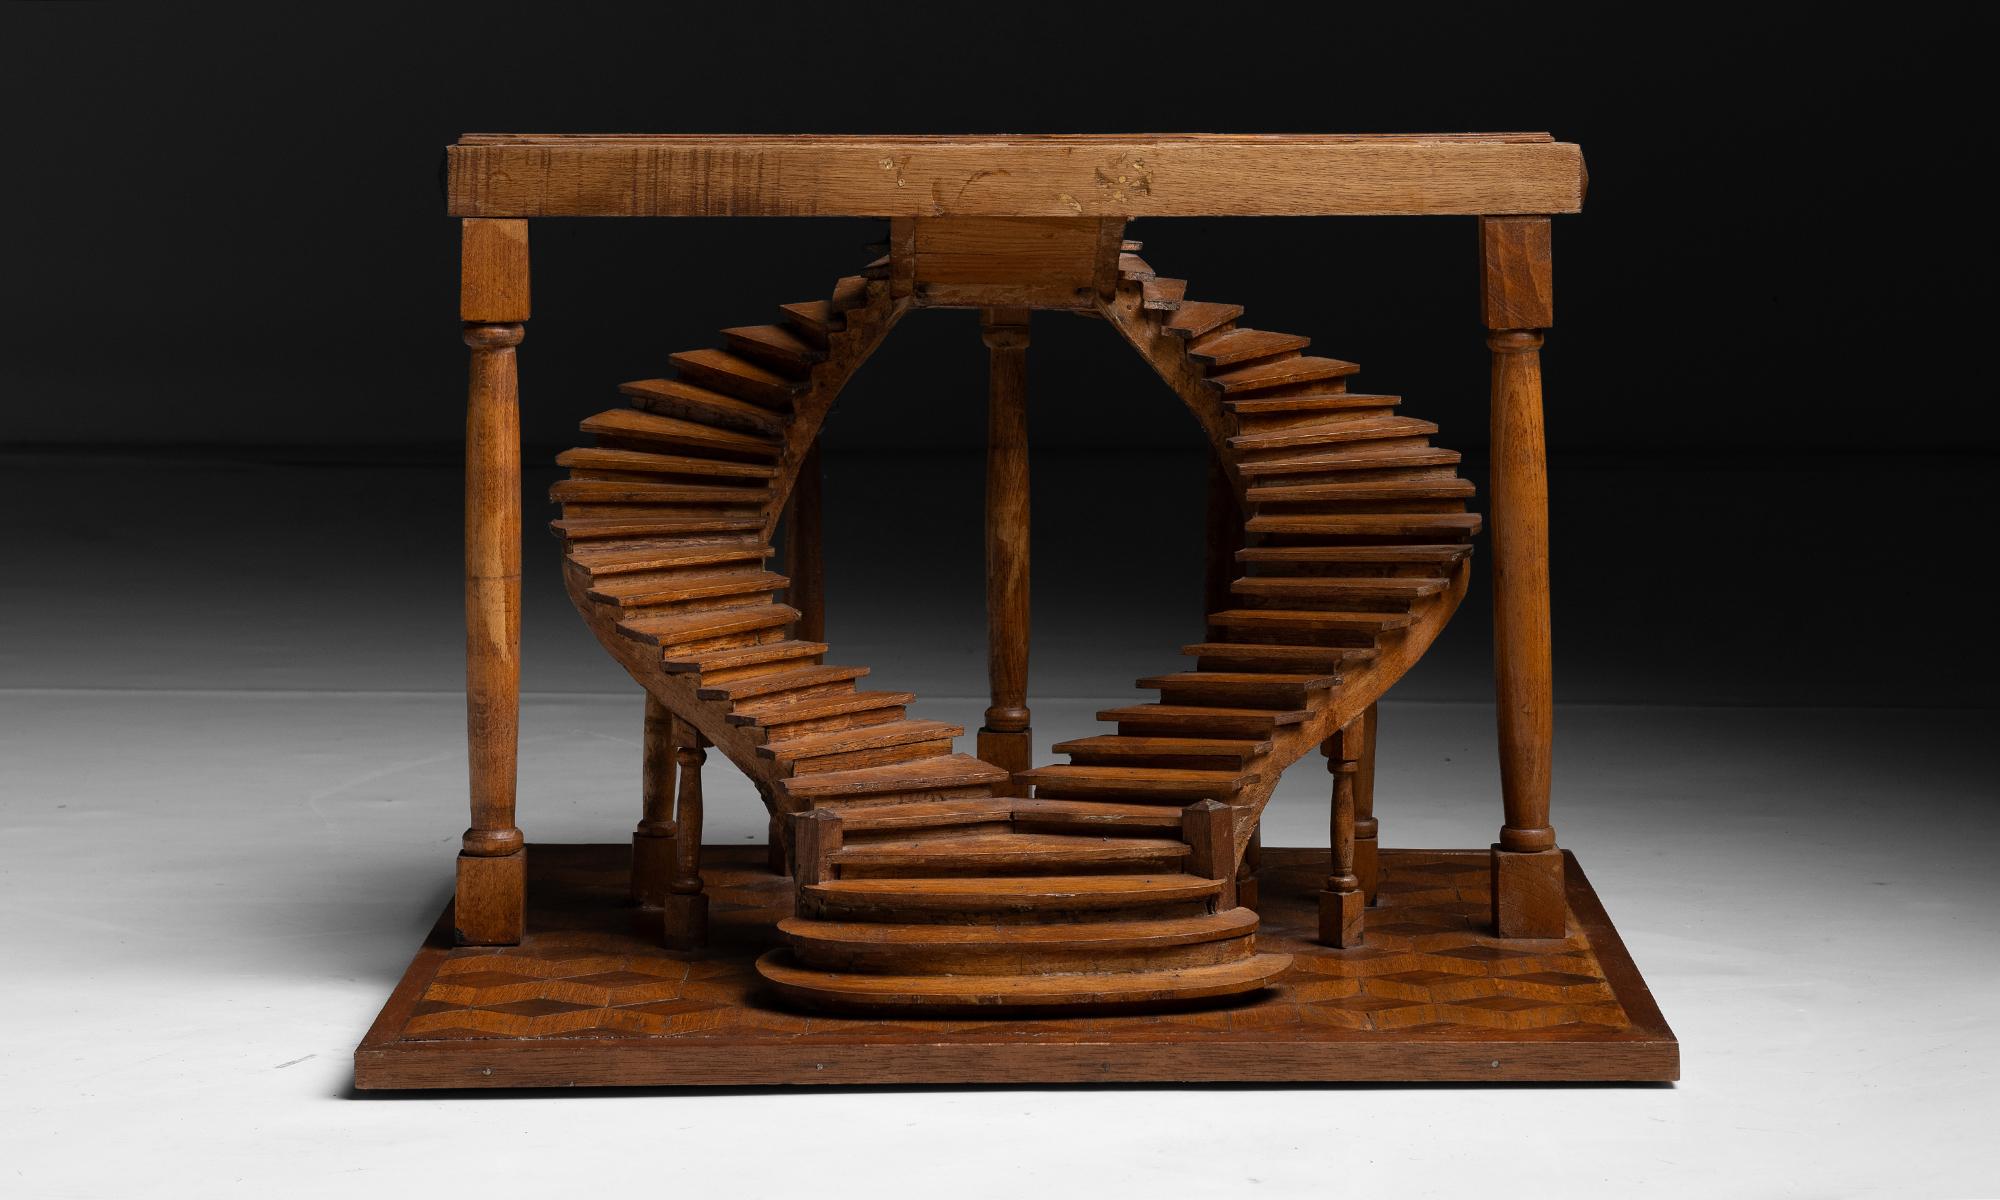 Double Staircase Model

Belgium circa 1950

Double staircase with marquetry base and composed of oak.

Measures 27”w x 22.5”d x 19”h